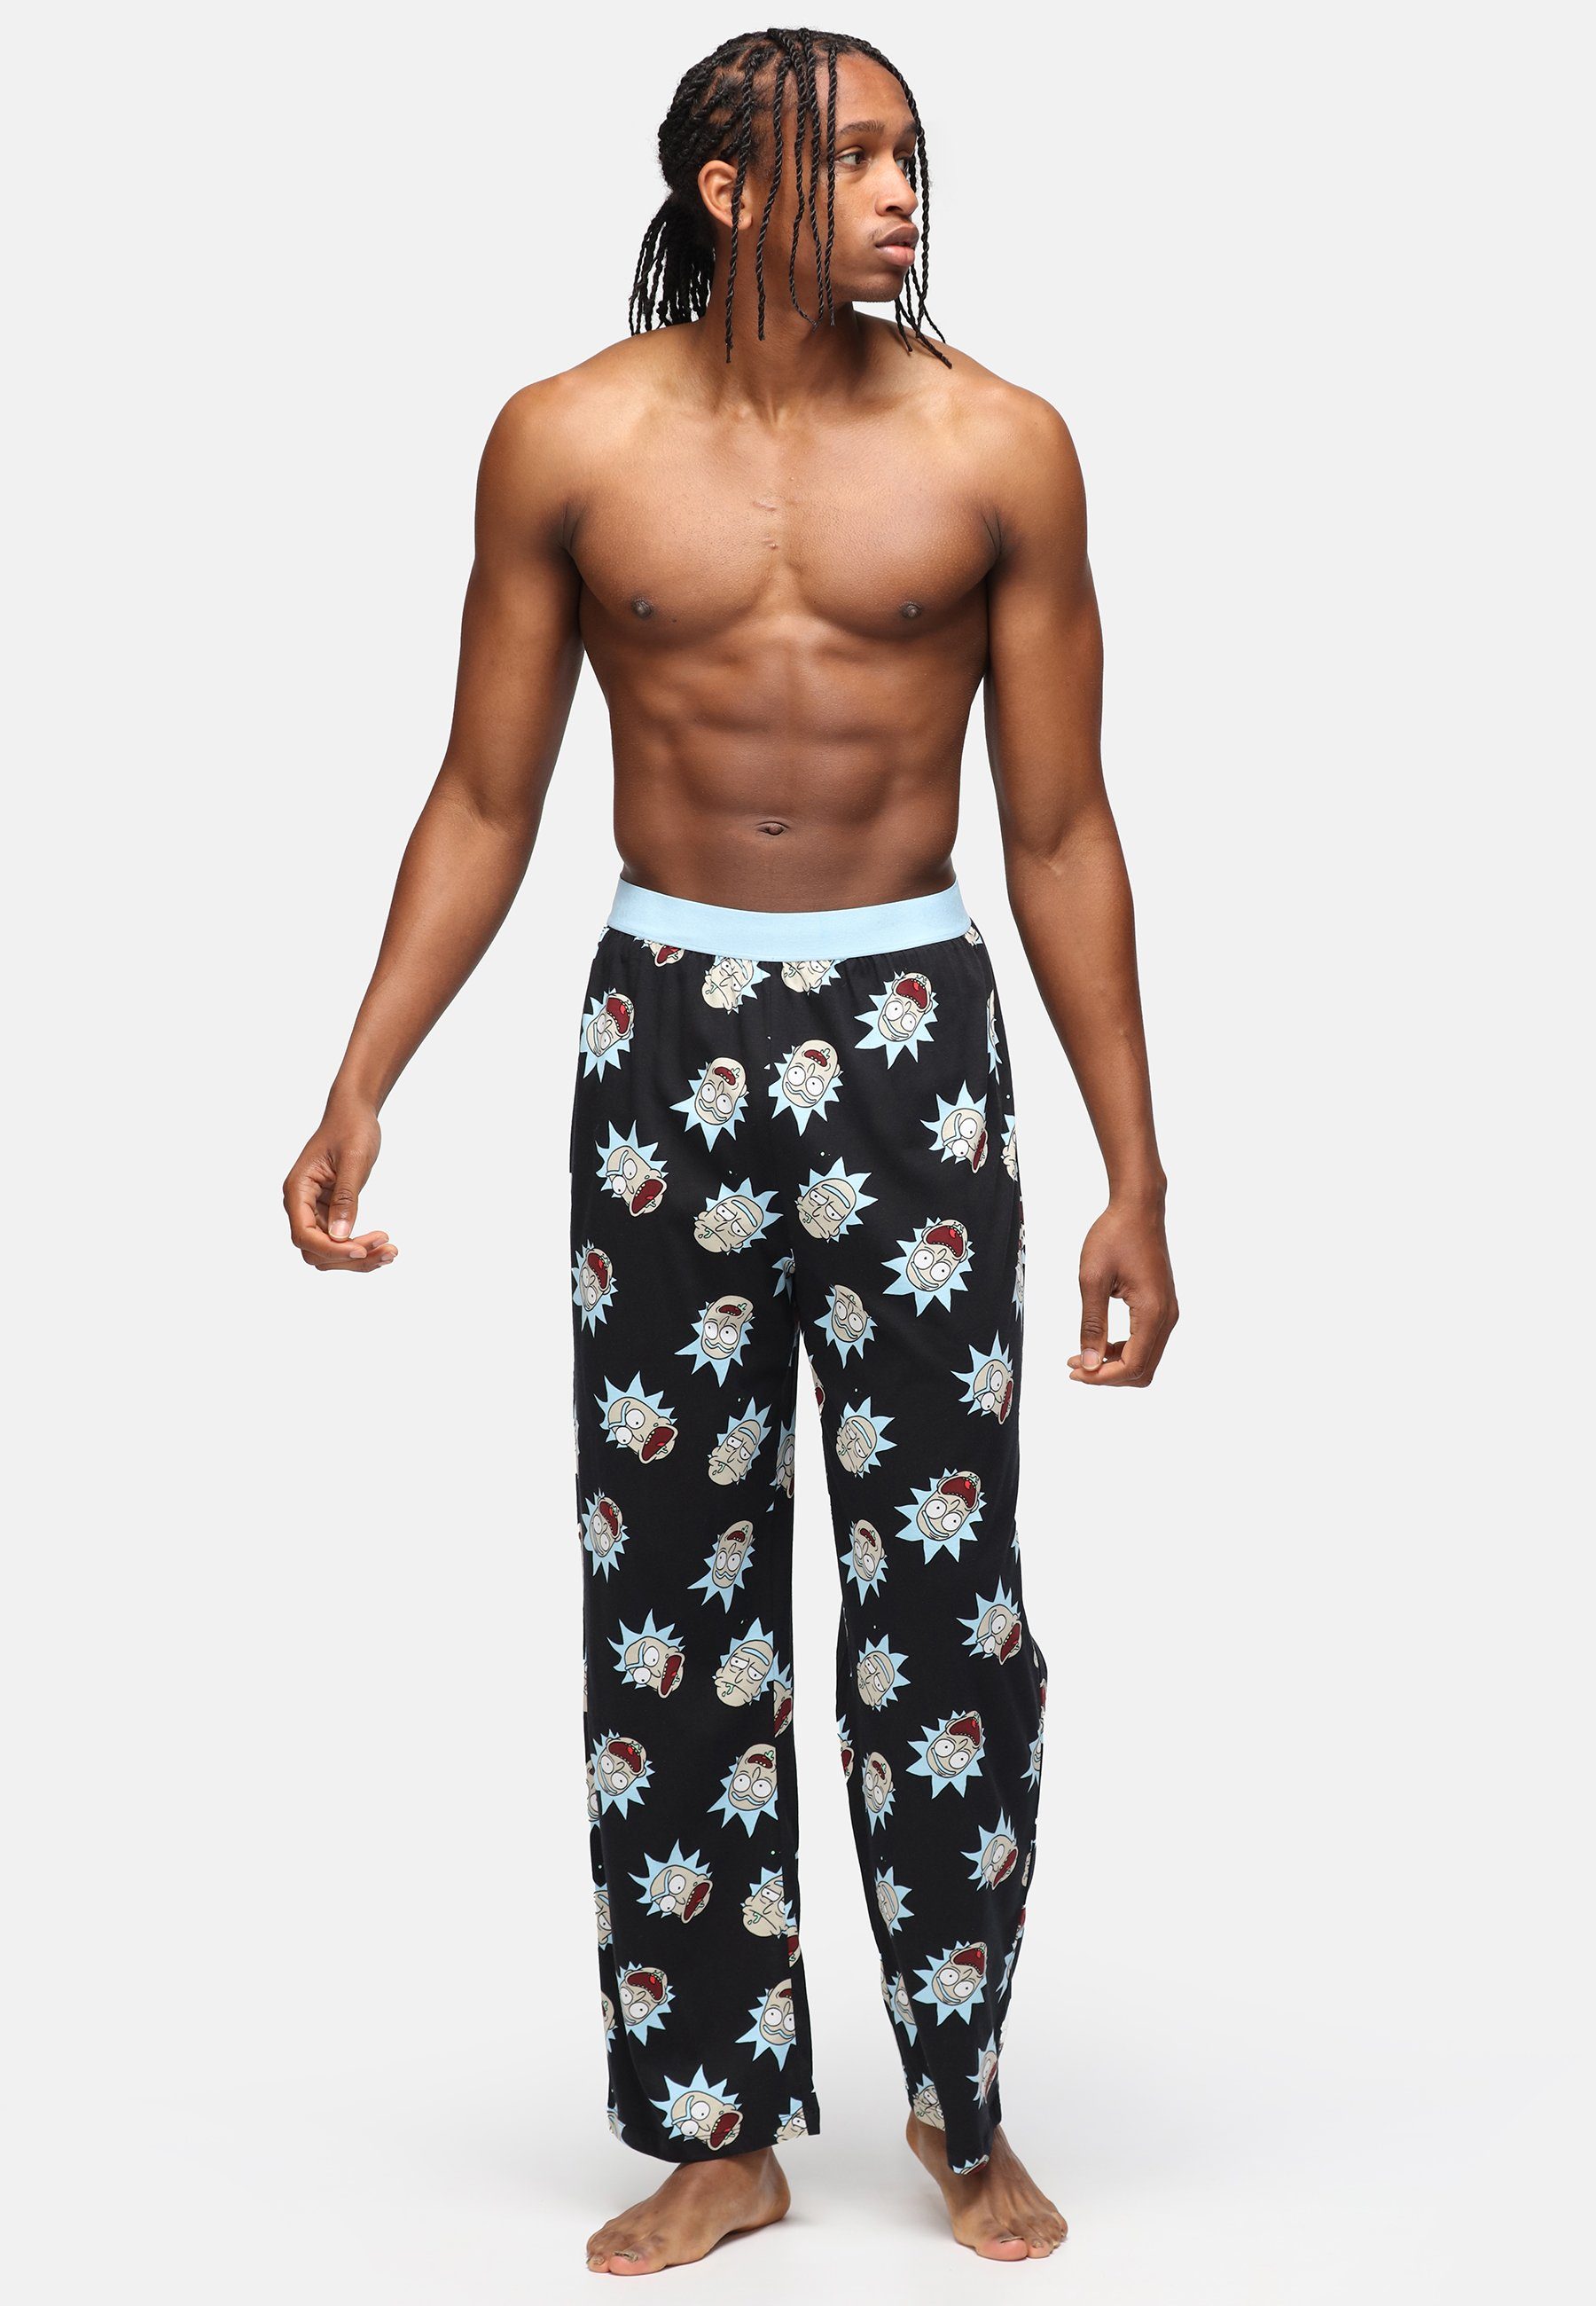 Morty Recovered Pant Lounge - - over print Rick and Loungepants all Faces Black